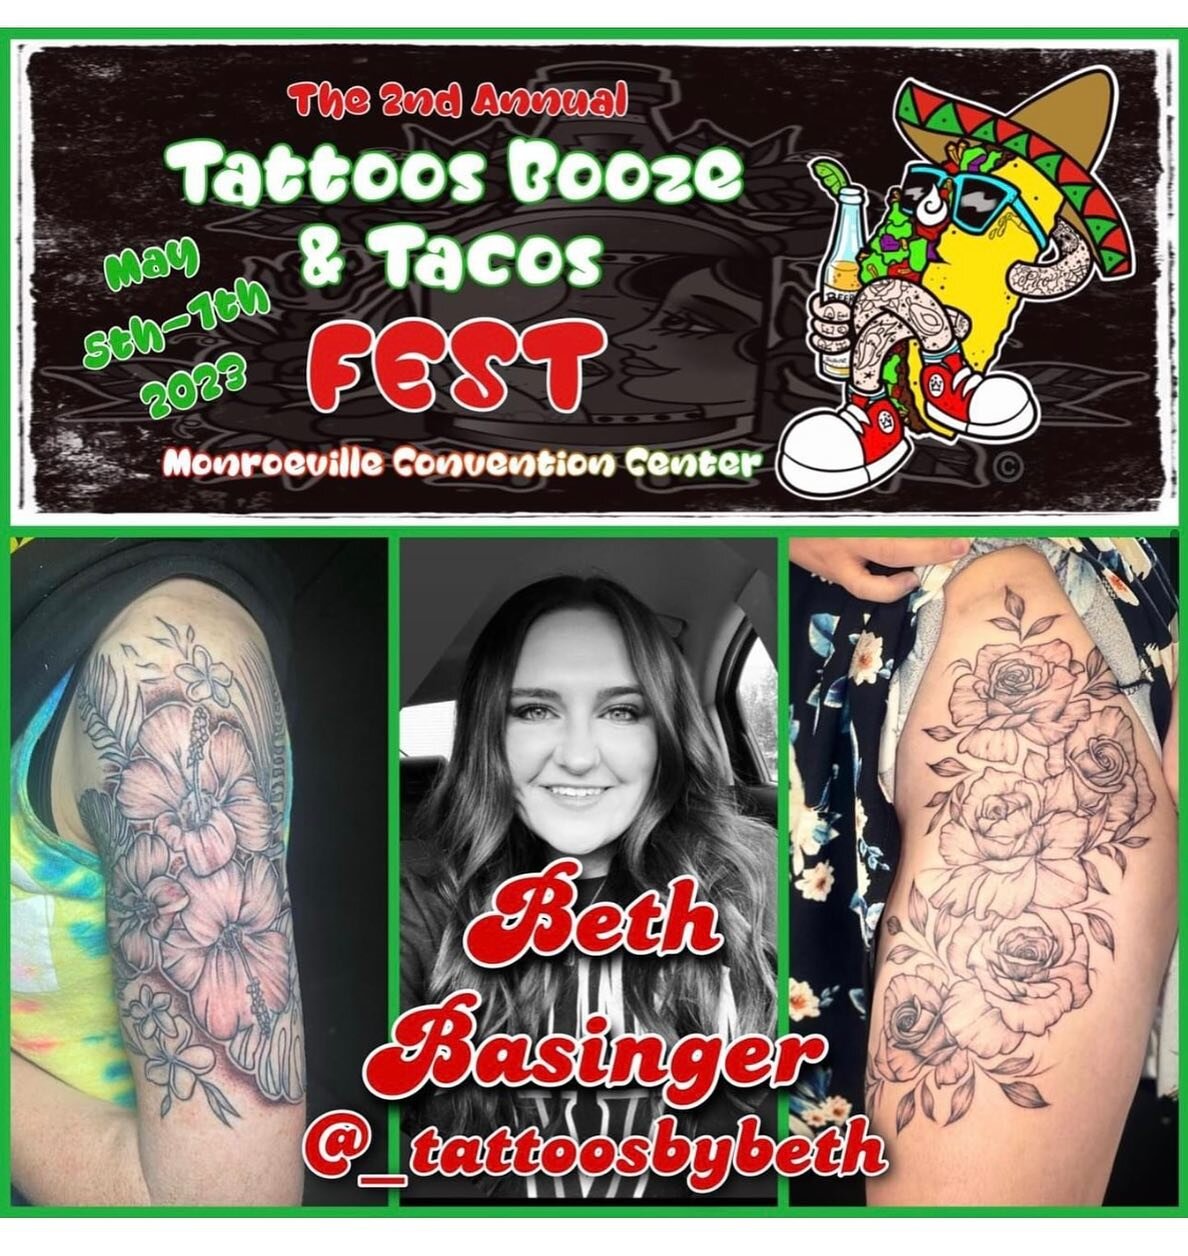 Come see @_tattoosbybeth &amp; Black Oak Artistry at our booth at this years convention in Monroeville. 
@tattoos_booze_tacos_fest May 5,6,7. Flash designs, custom designs and a giveaway 👍